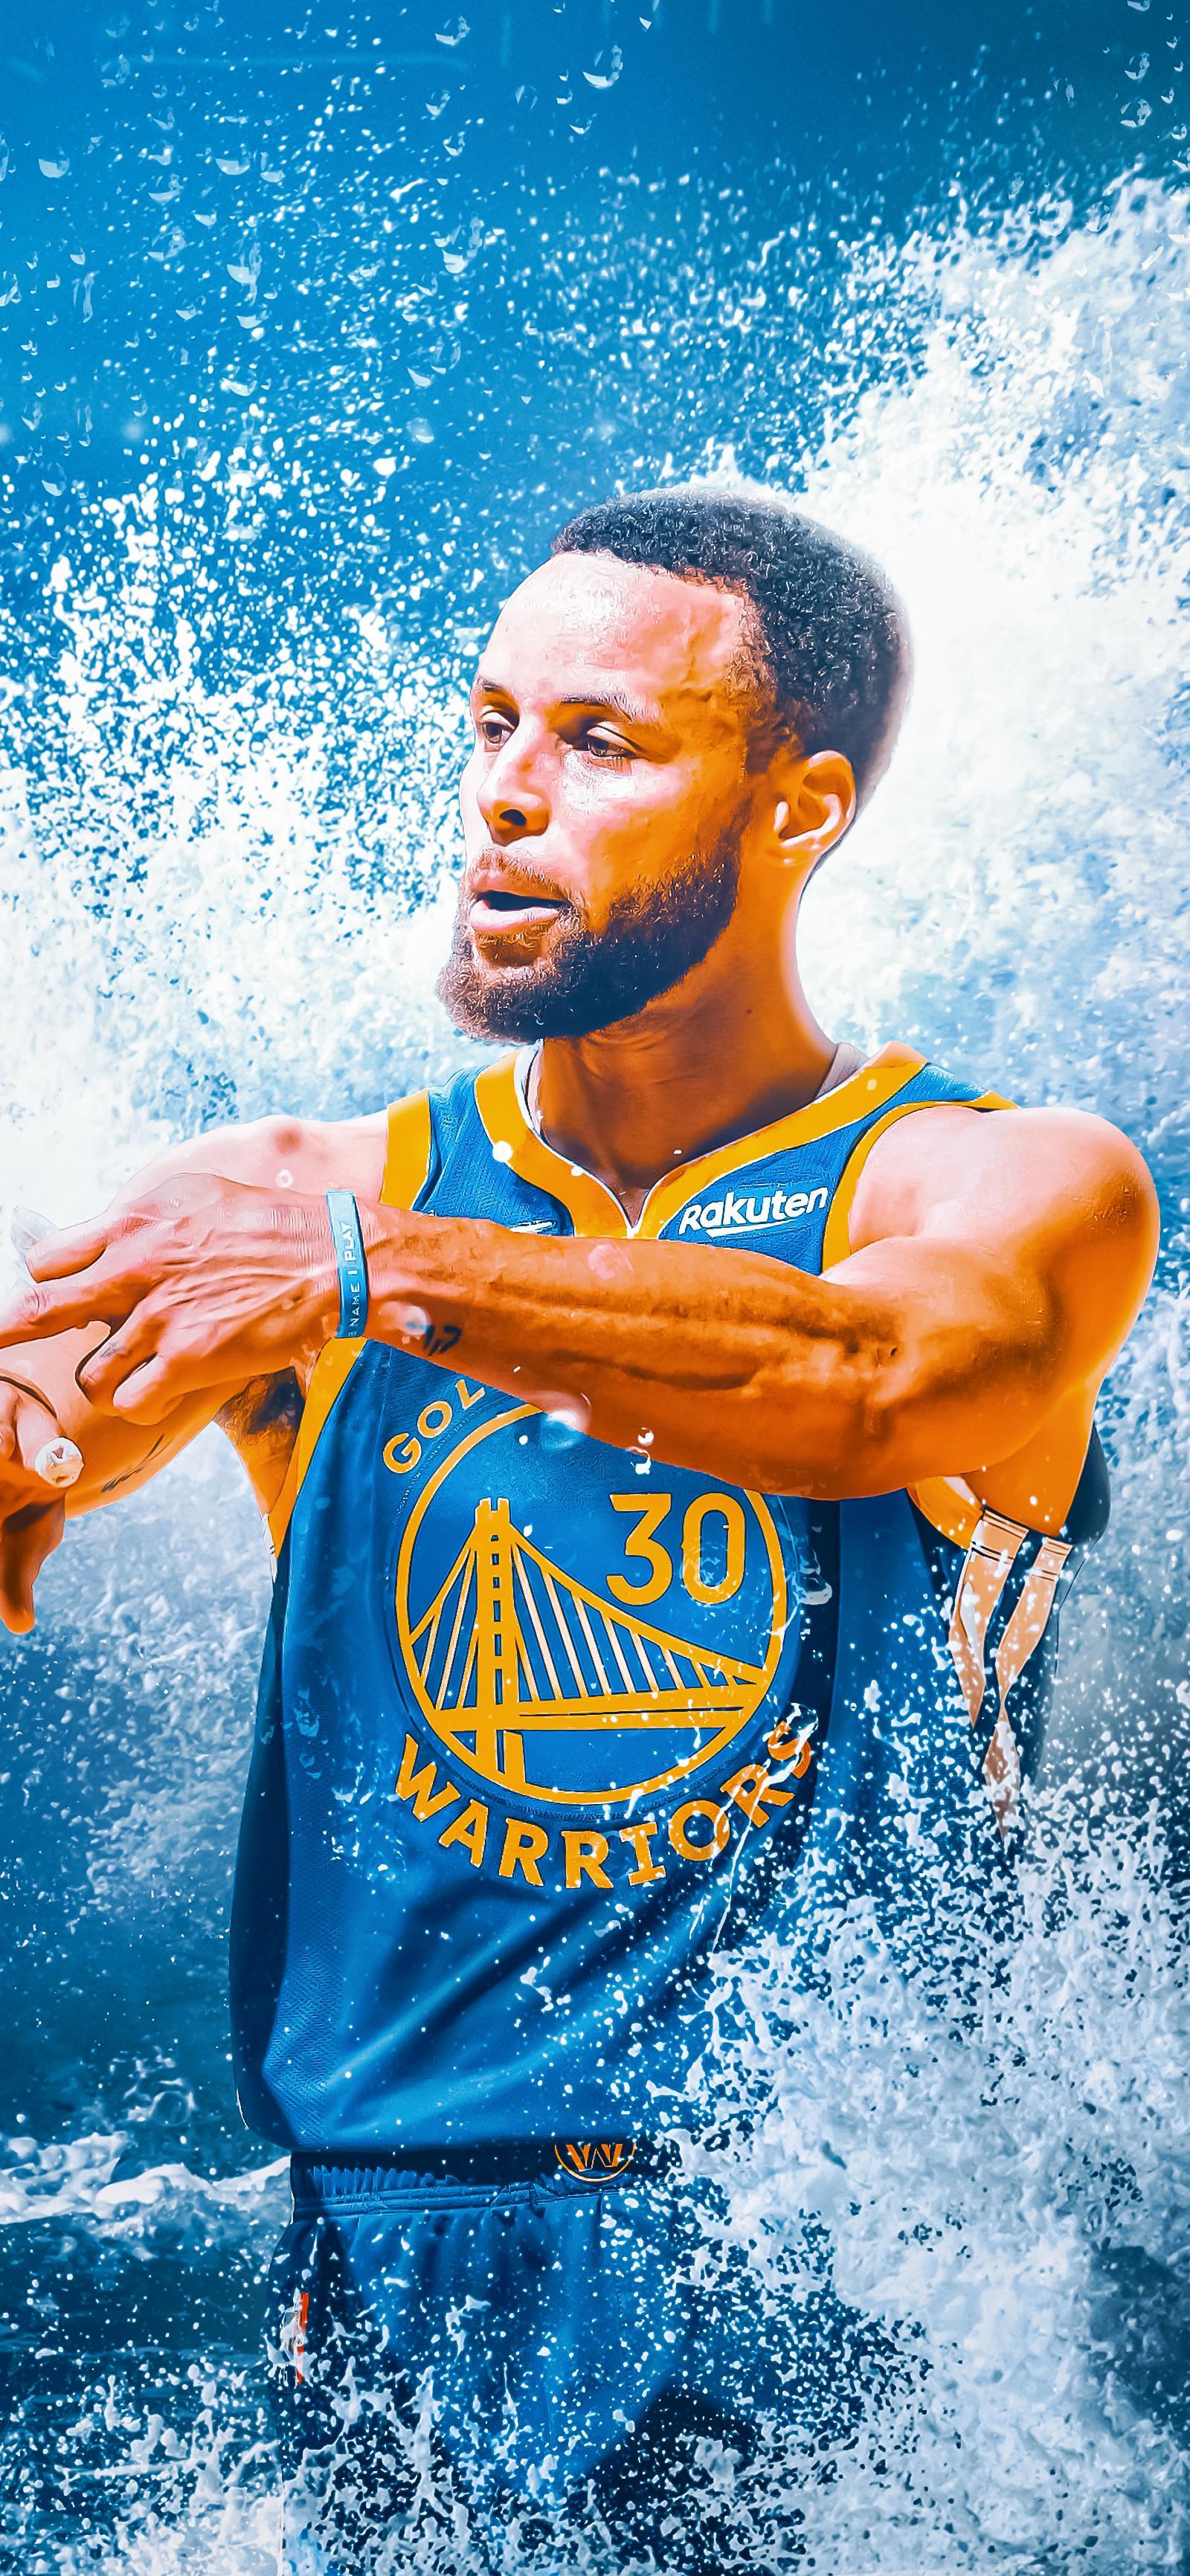 Wallpaper Of Steph For Those Who Want It Design Based Off His